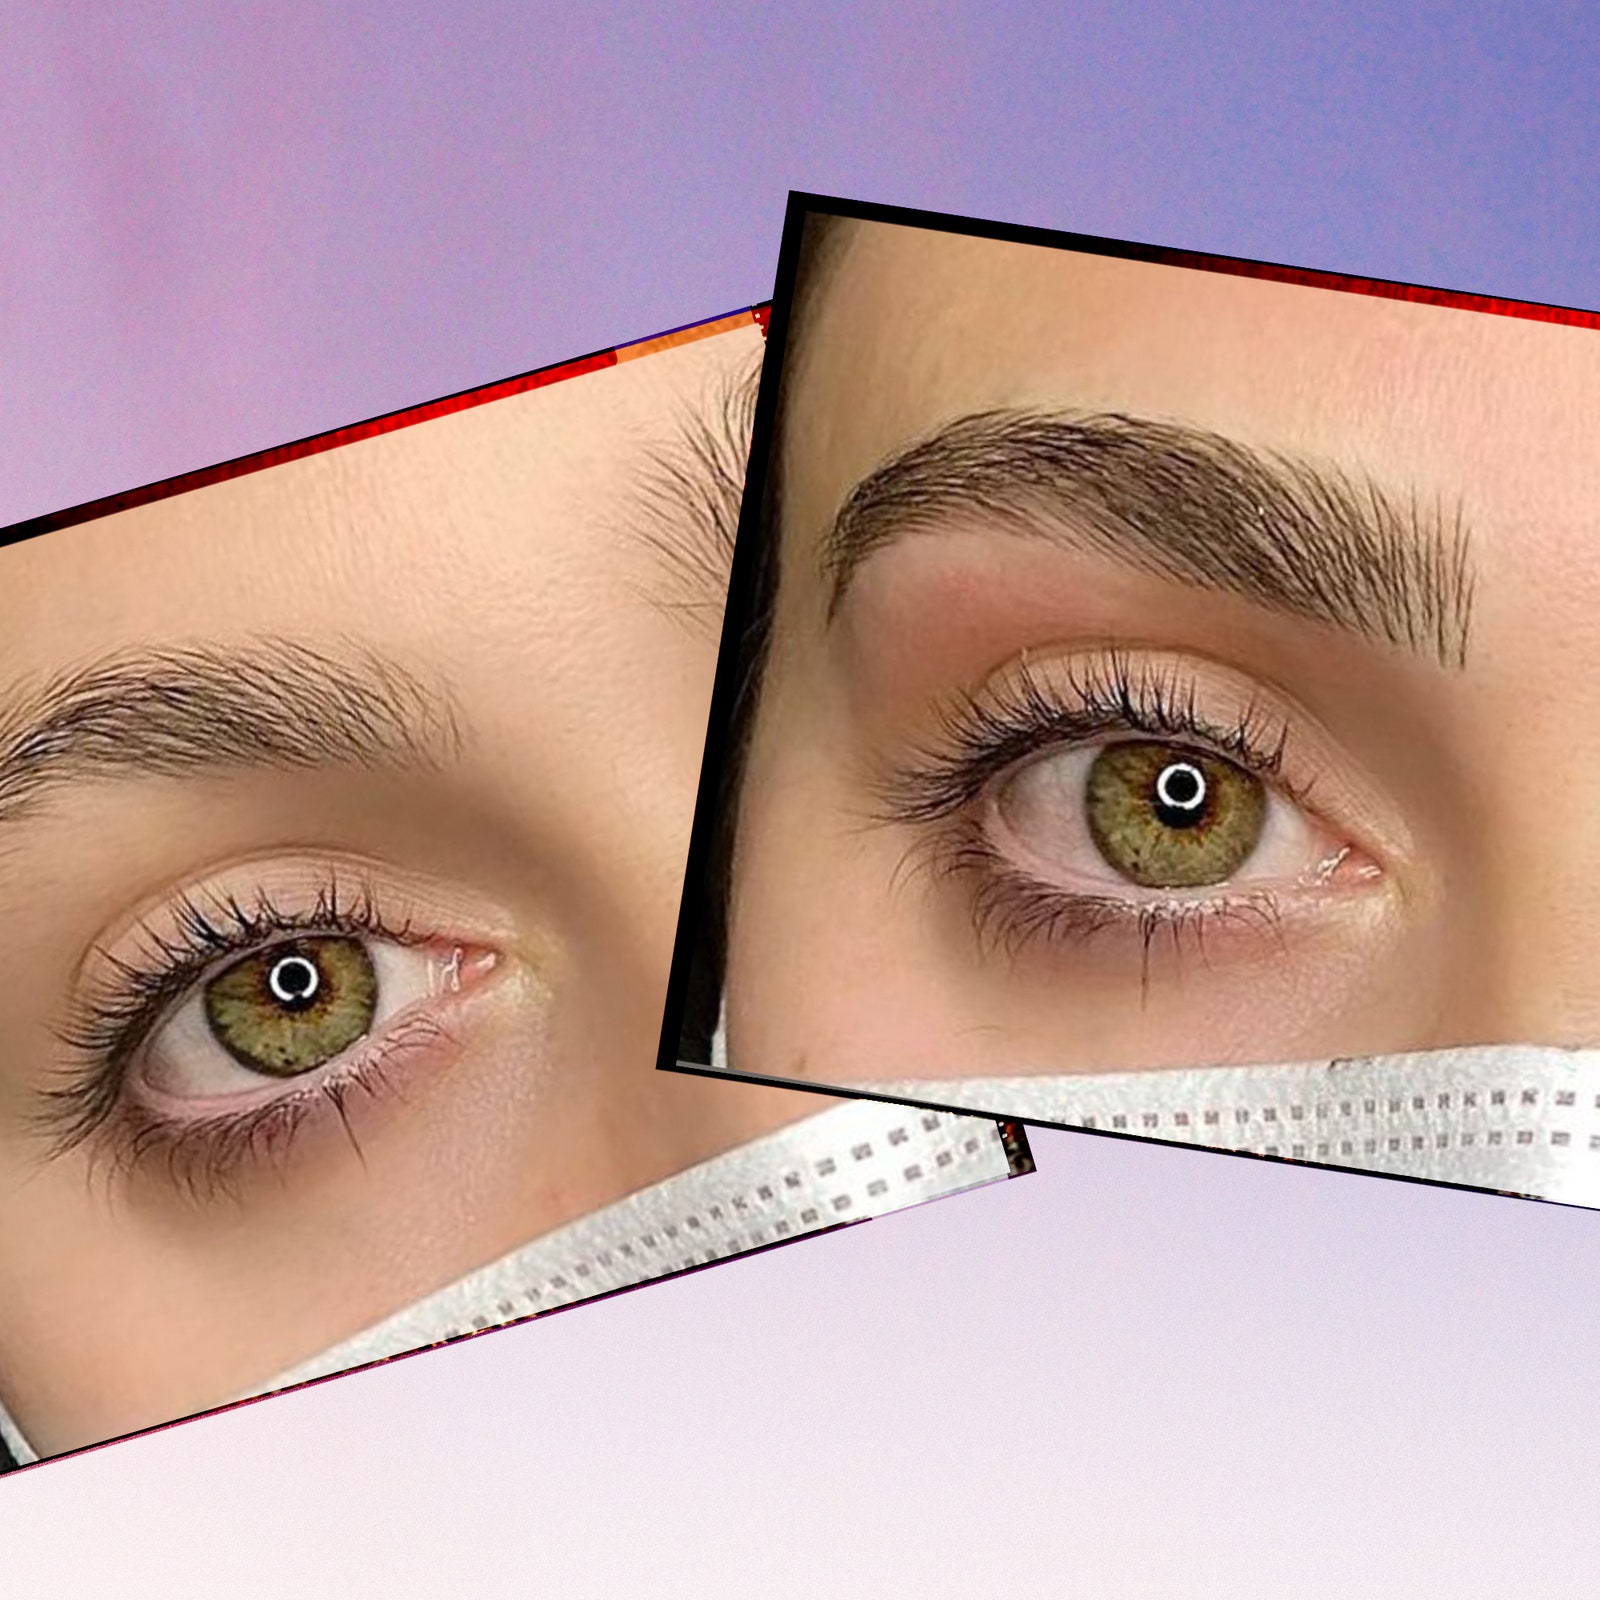 The Most Common Long-Term Effects of Microblading